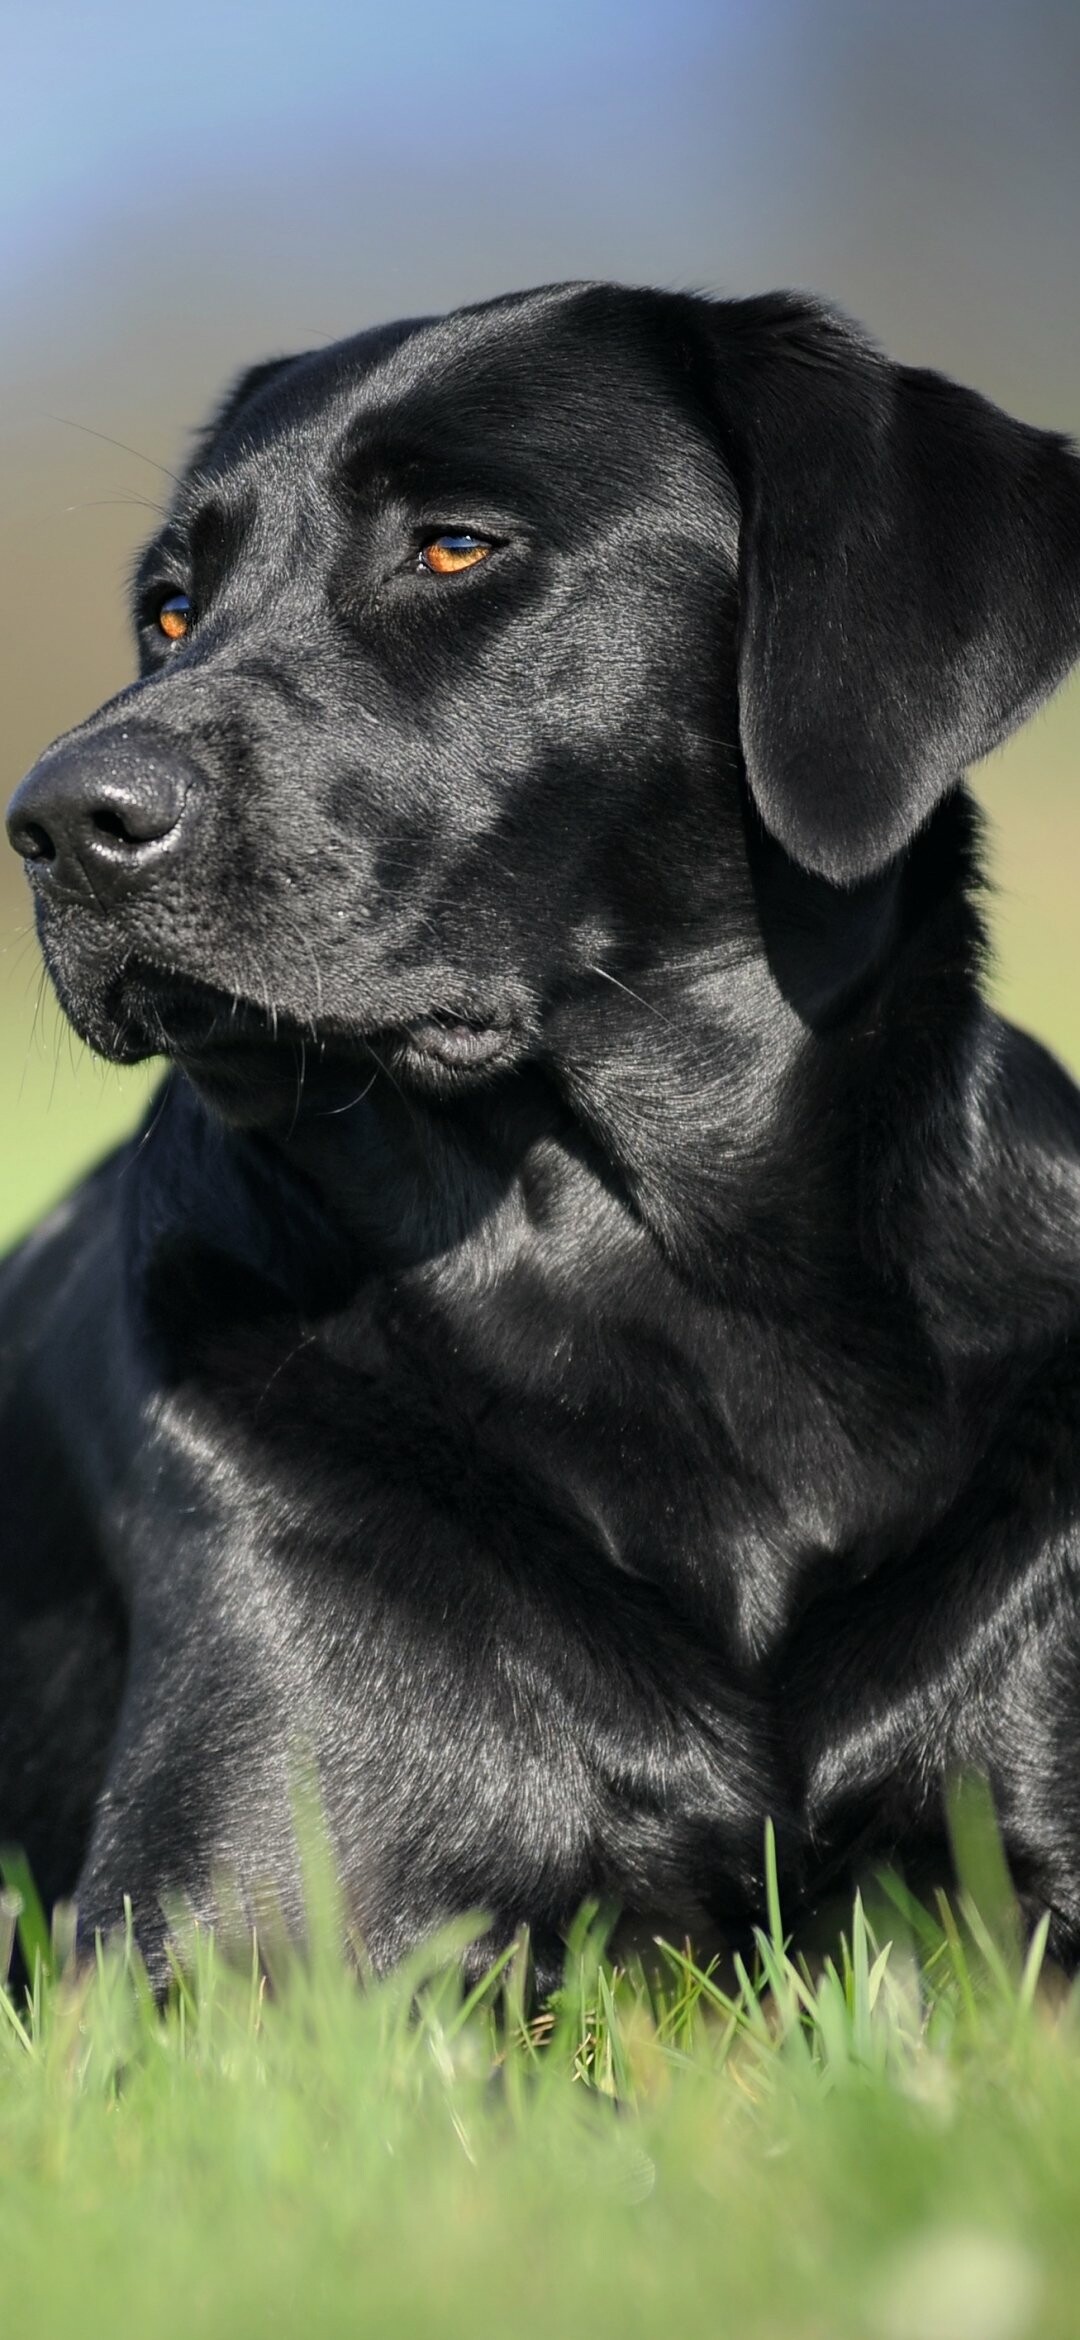 Labrador: The Lab is an enthusiastic athlete that requires lots of exercise, like swimming and marathon games of fetch, to keep physically and mentally fit. 1080x2340 HD Background.